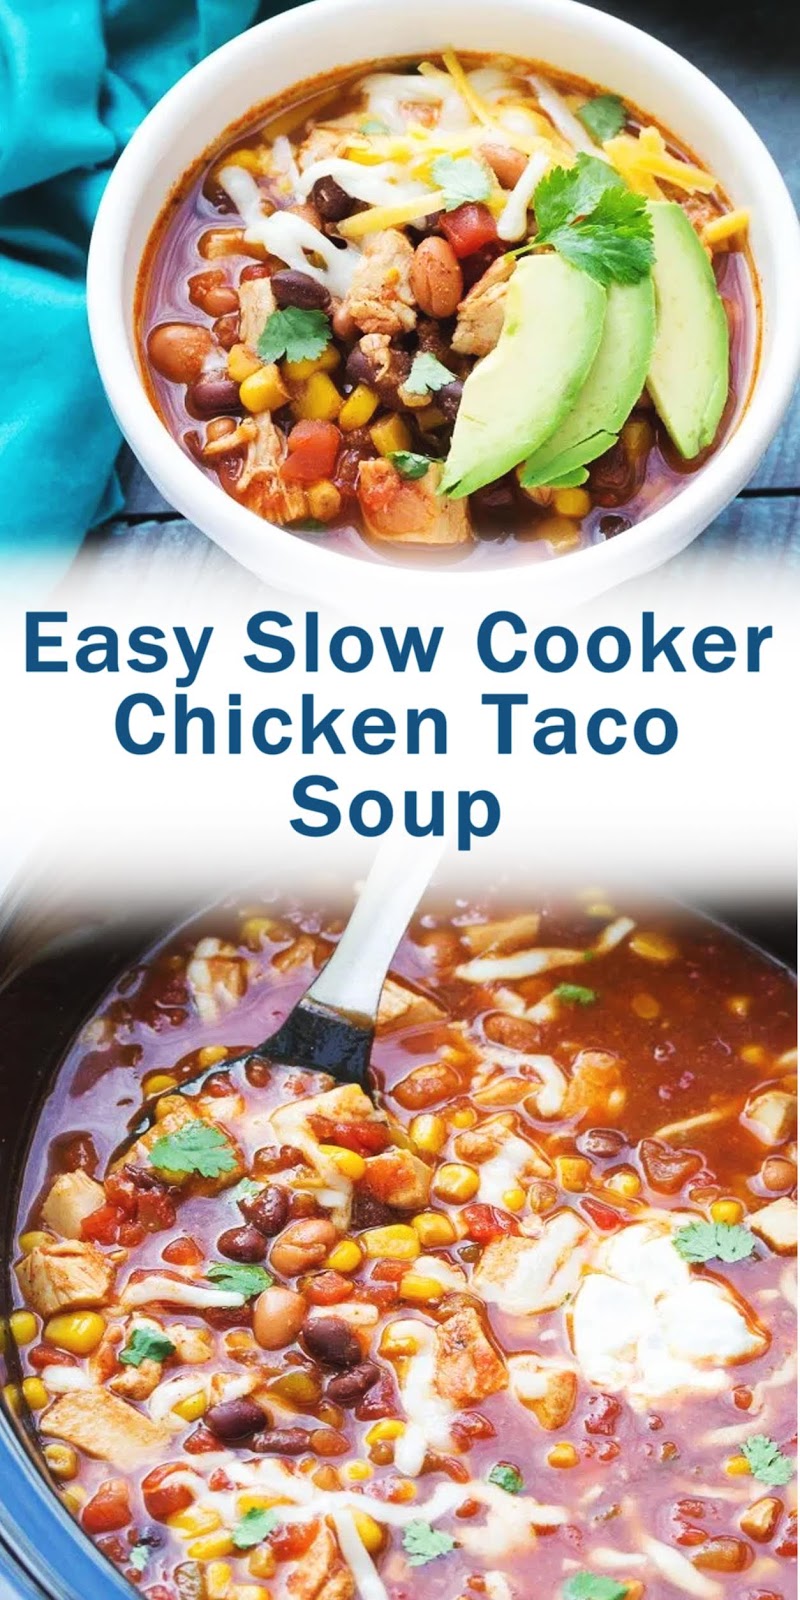 Easy Slow Cooker Chicken Taco Soup